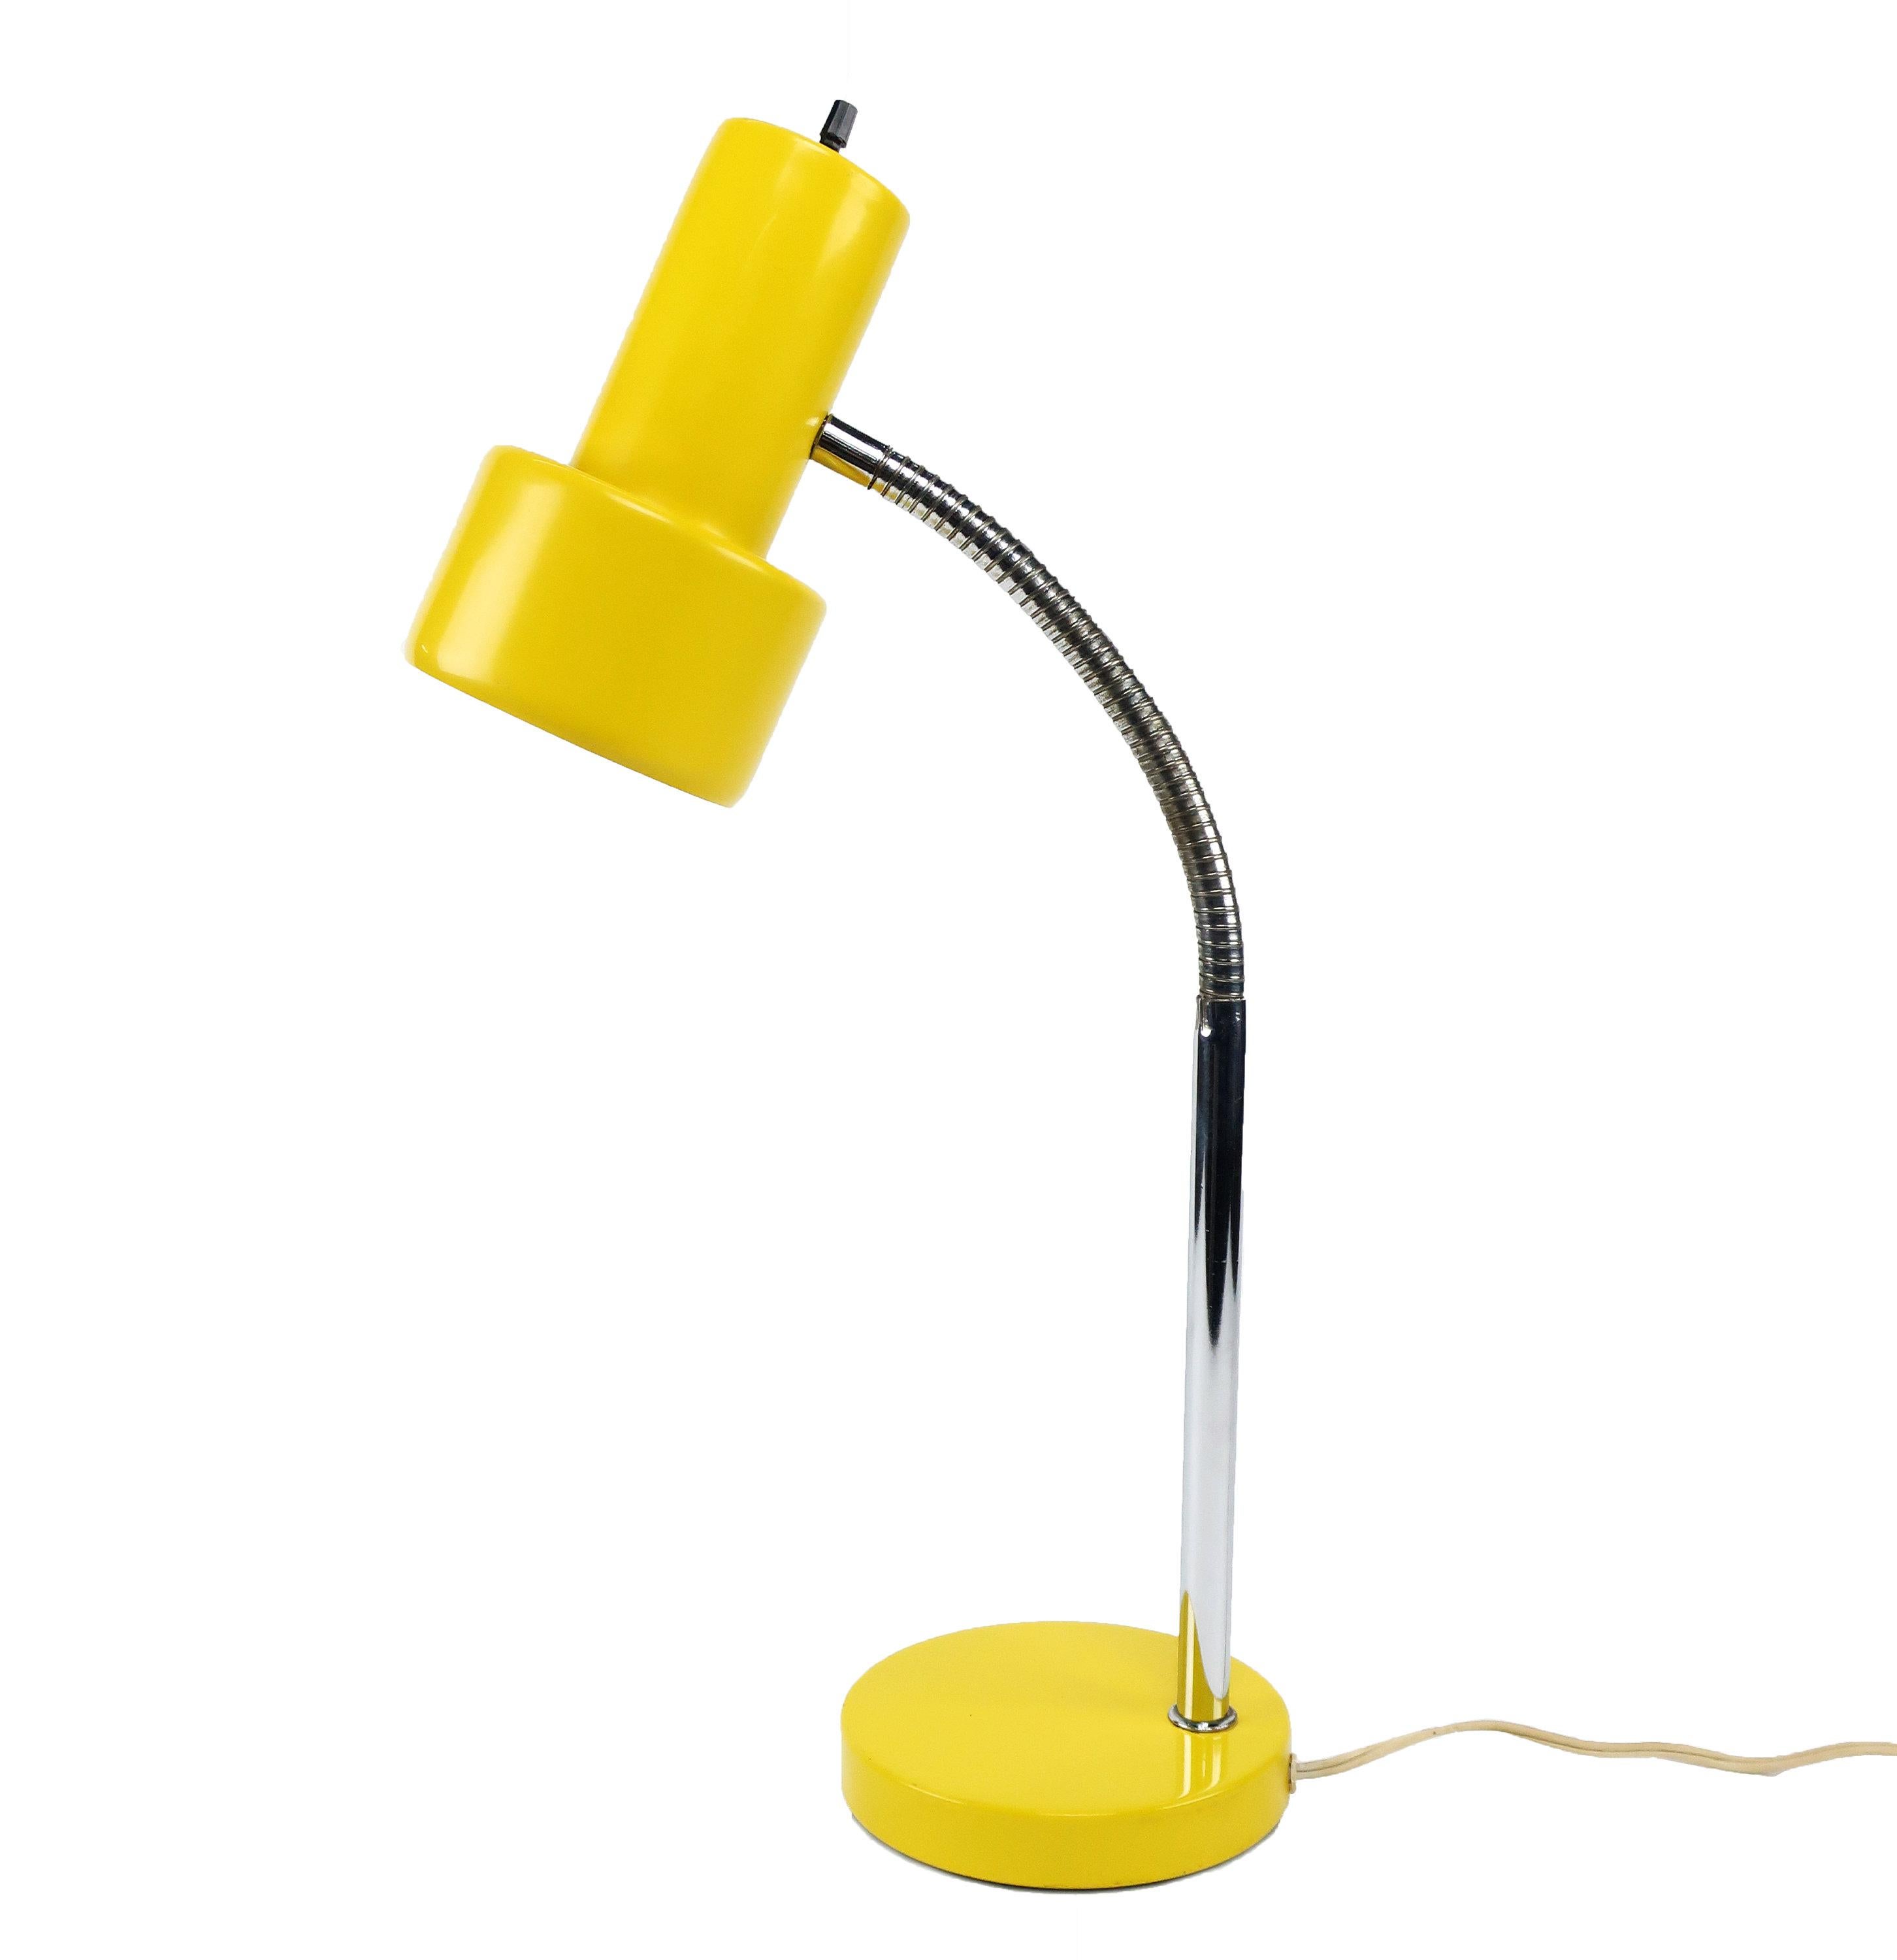 A lovely Mid-Century Modern desk lamp with yellow metal base/shade and chrome stem/gooseneck. Perfect for an office or as accent lighting. In excellent vintage condition with wear consistent with age . 

5.5